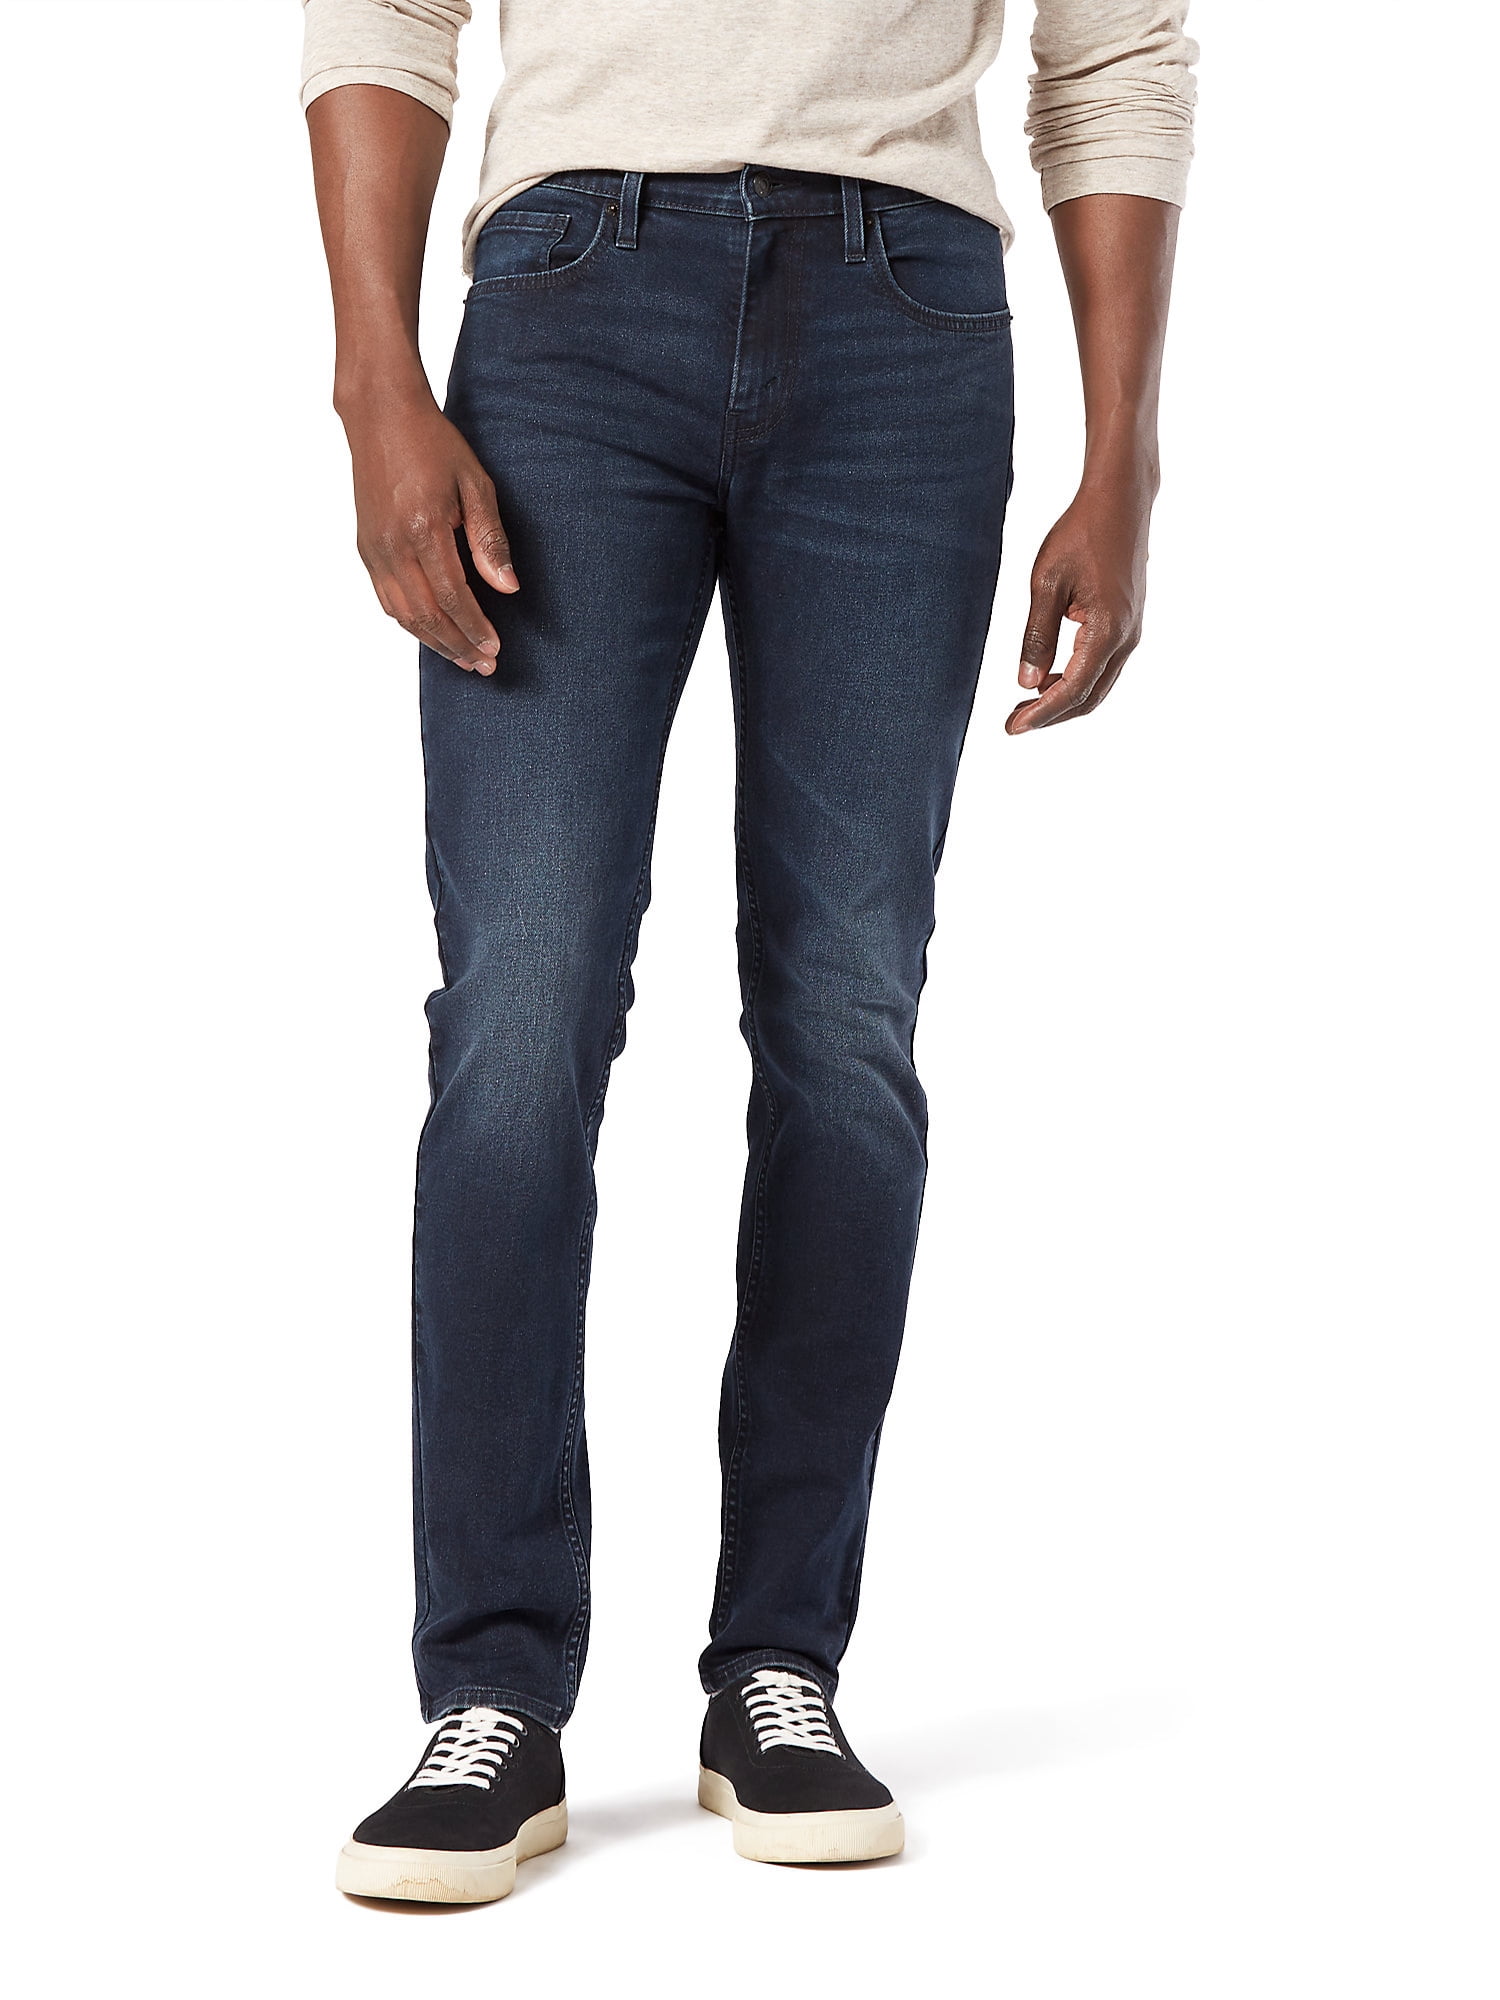 Signature by Levi Strauss & Co. Men's Skinny Fit Jeans - Walmart.com